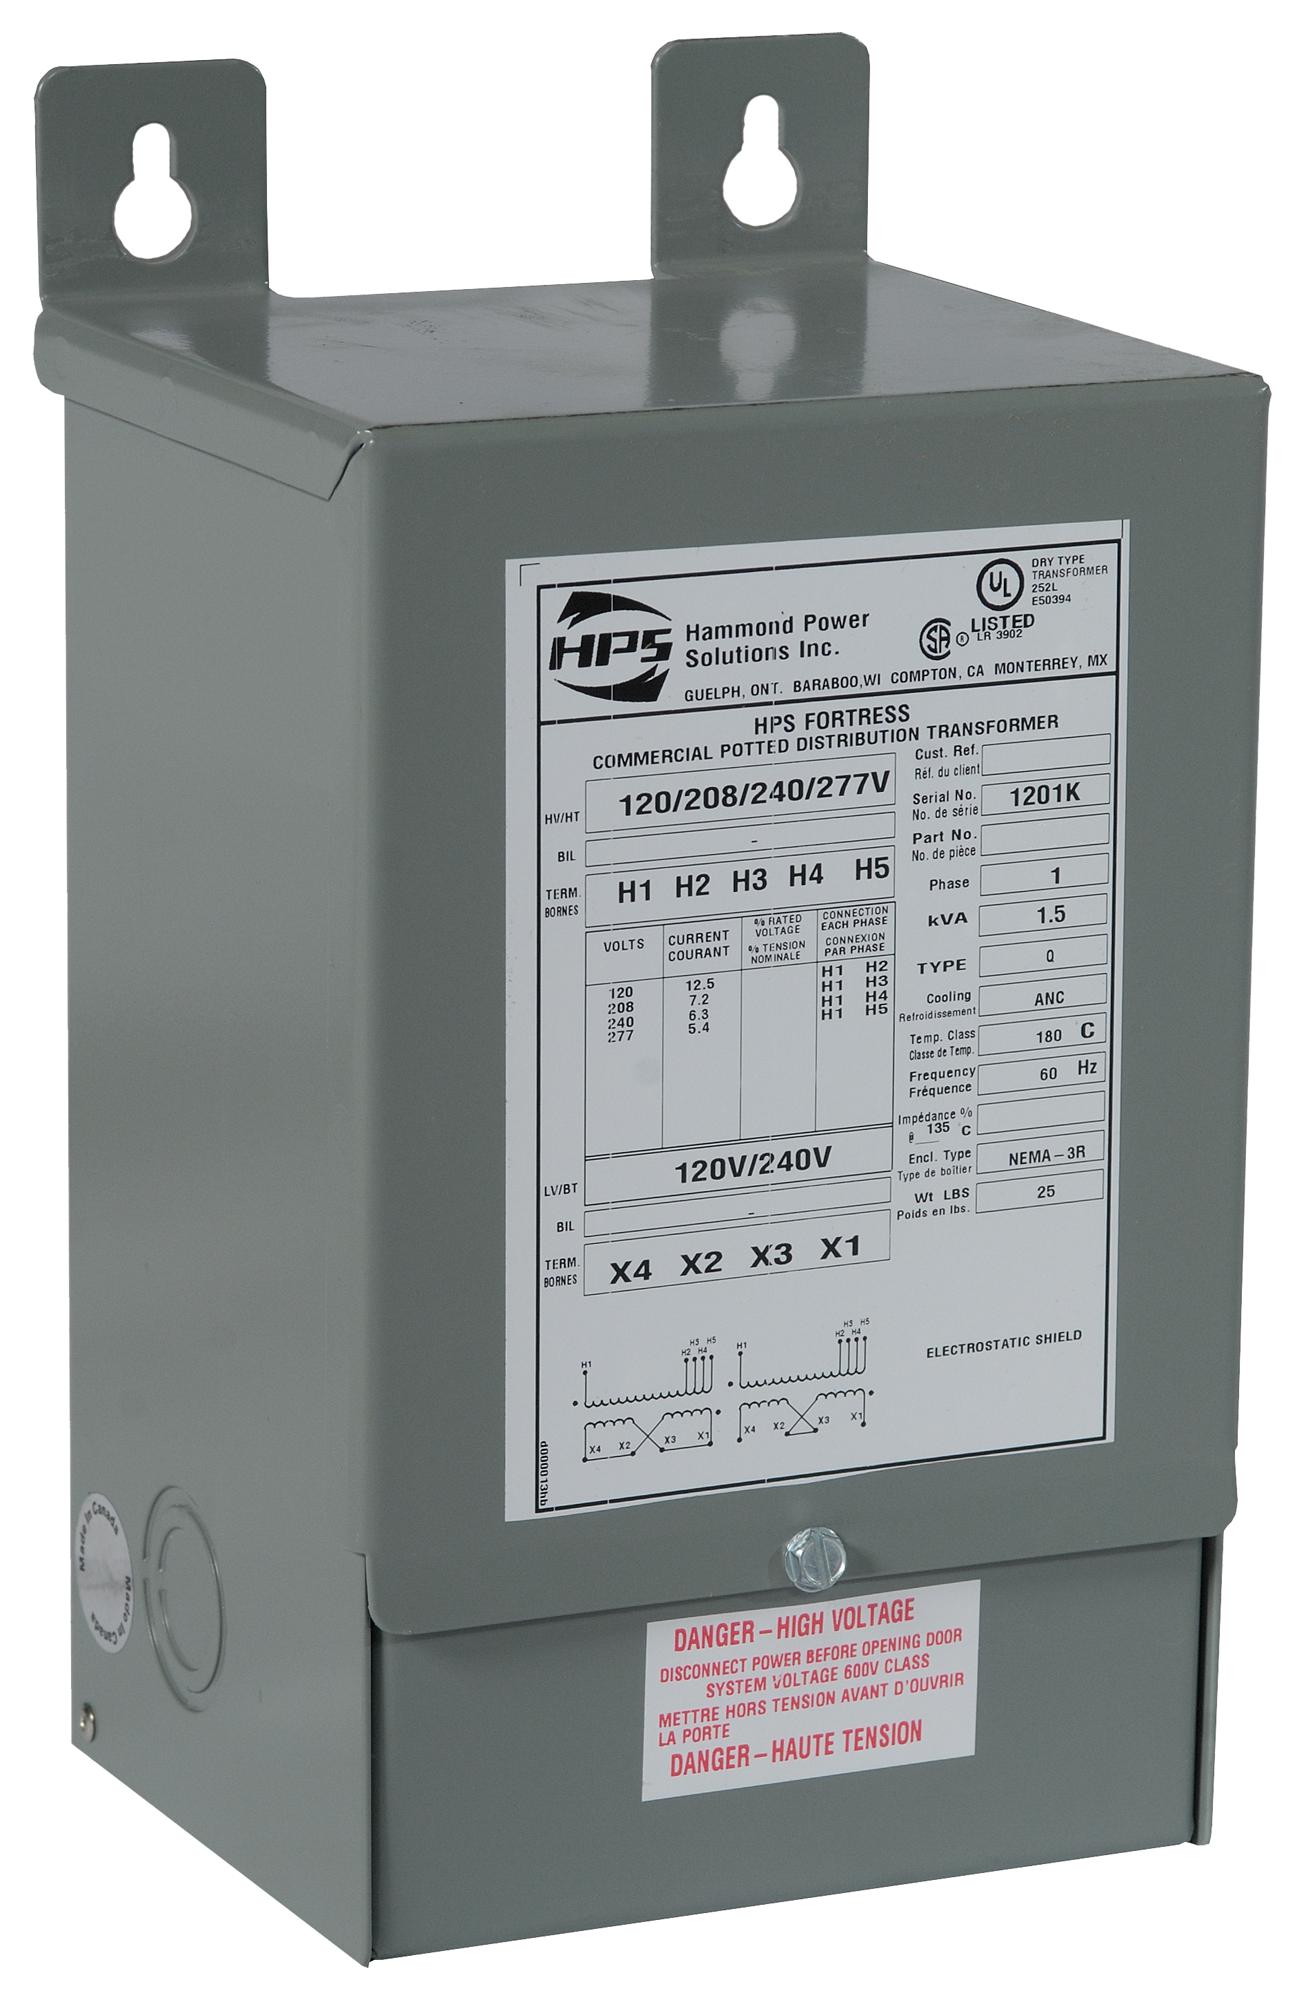 Hammond Power Solutions C1F003Ees Wall Mount Transformer Type: EnCapacitorsulated Isolation